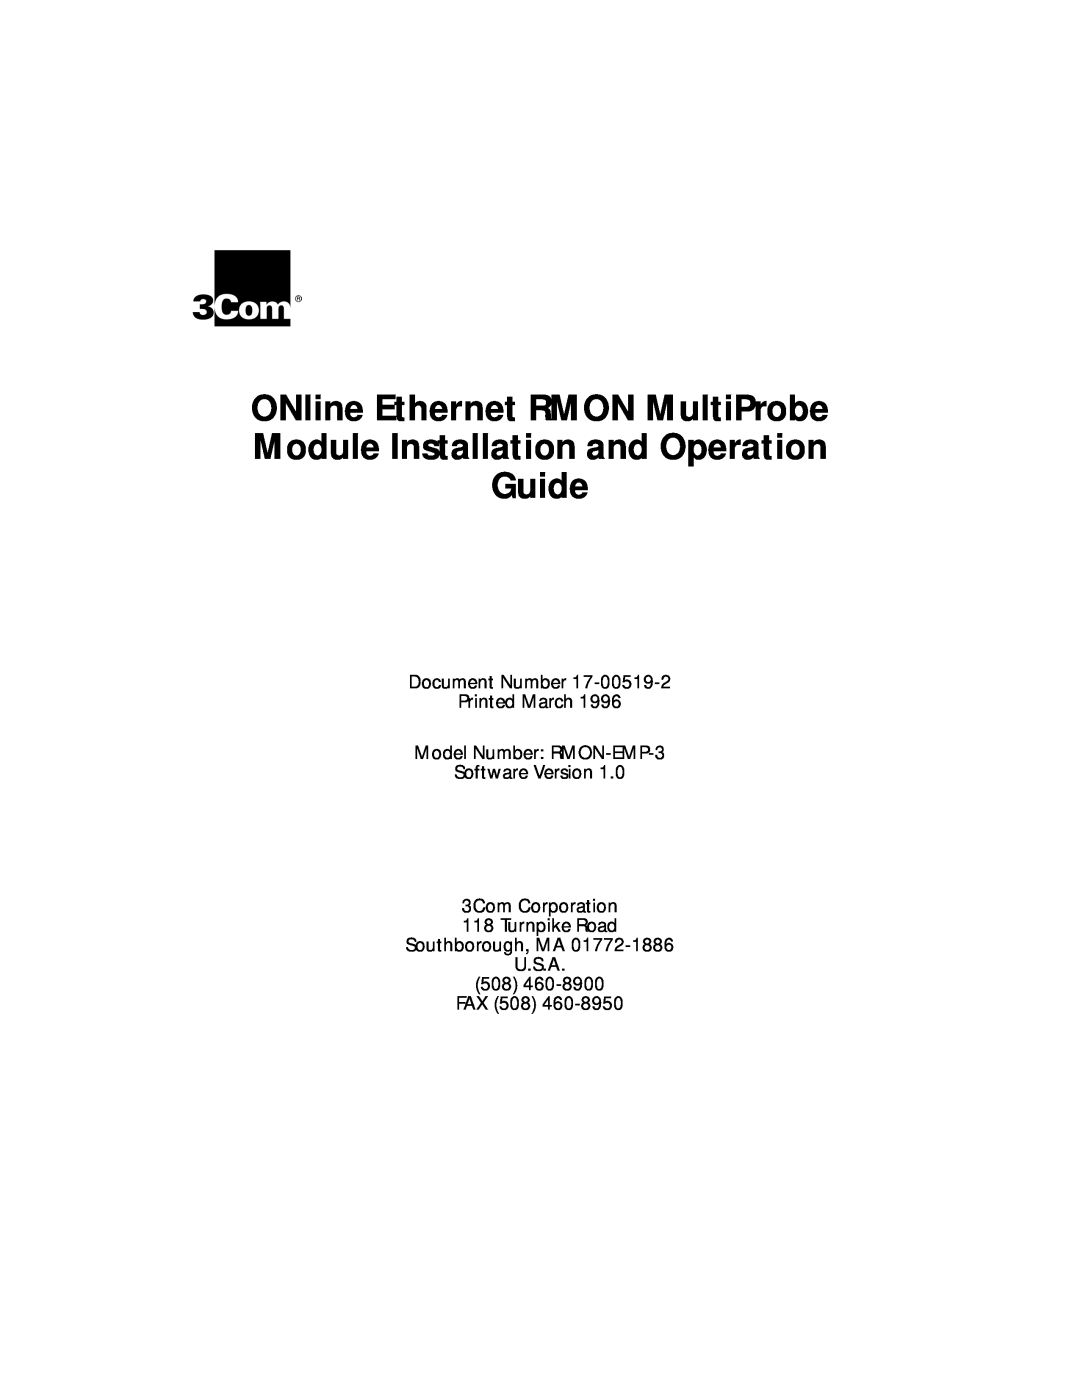 3Com RMON-EMP-3 installation and operation guide ONline Ethernet RMON MultiProbe Module Installation and Operation, Guide 